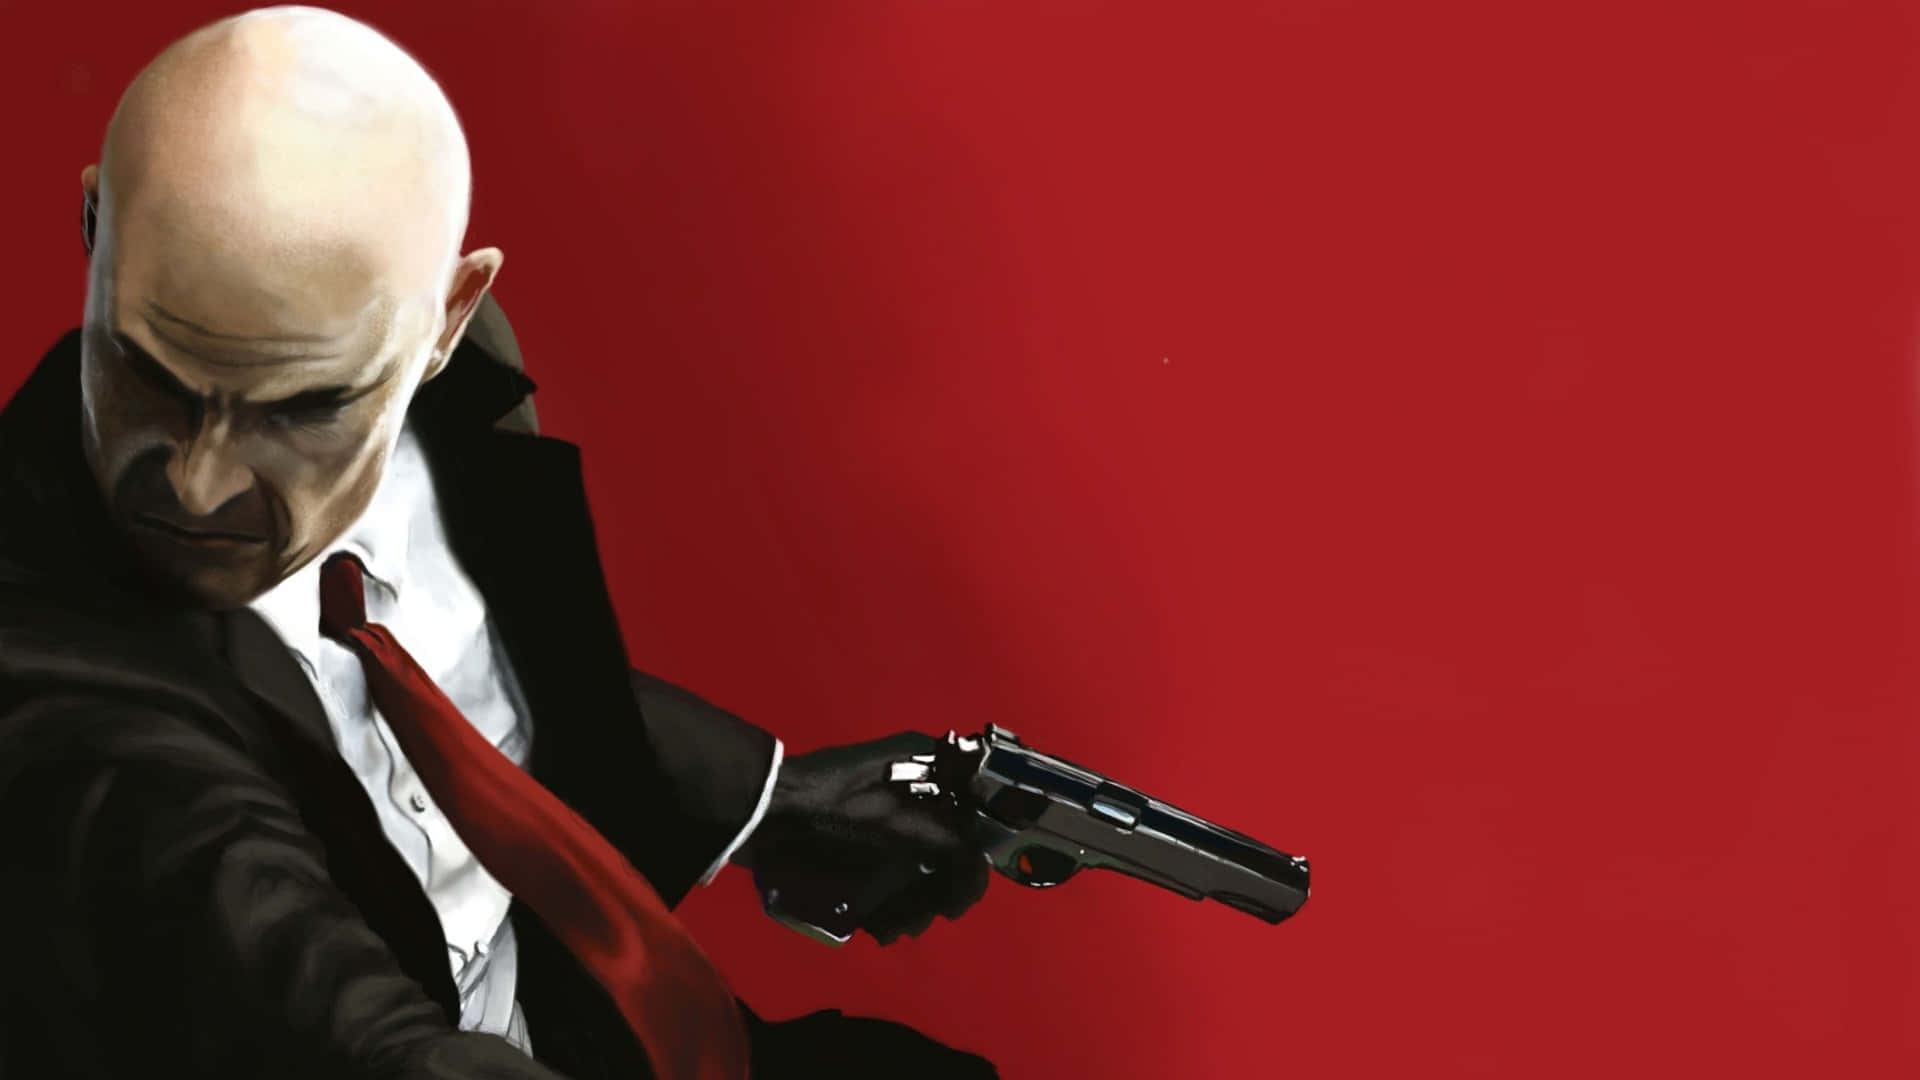 Agent 47 in the highly acclaimed game "Hitman Absolution".